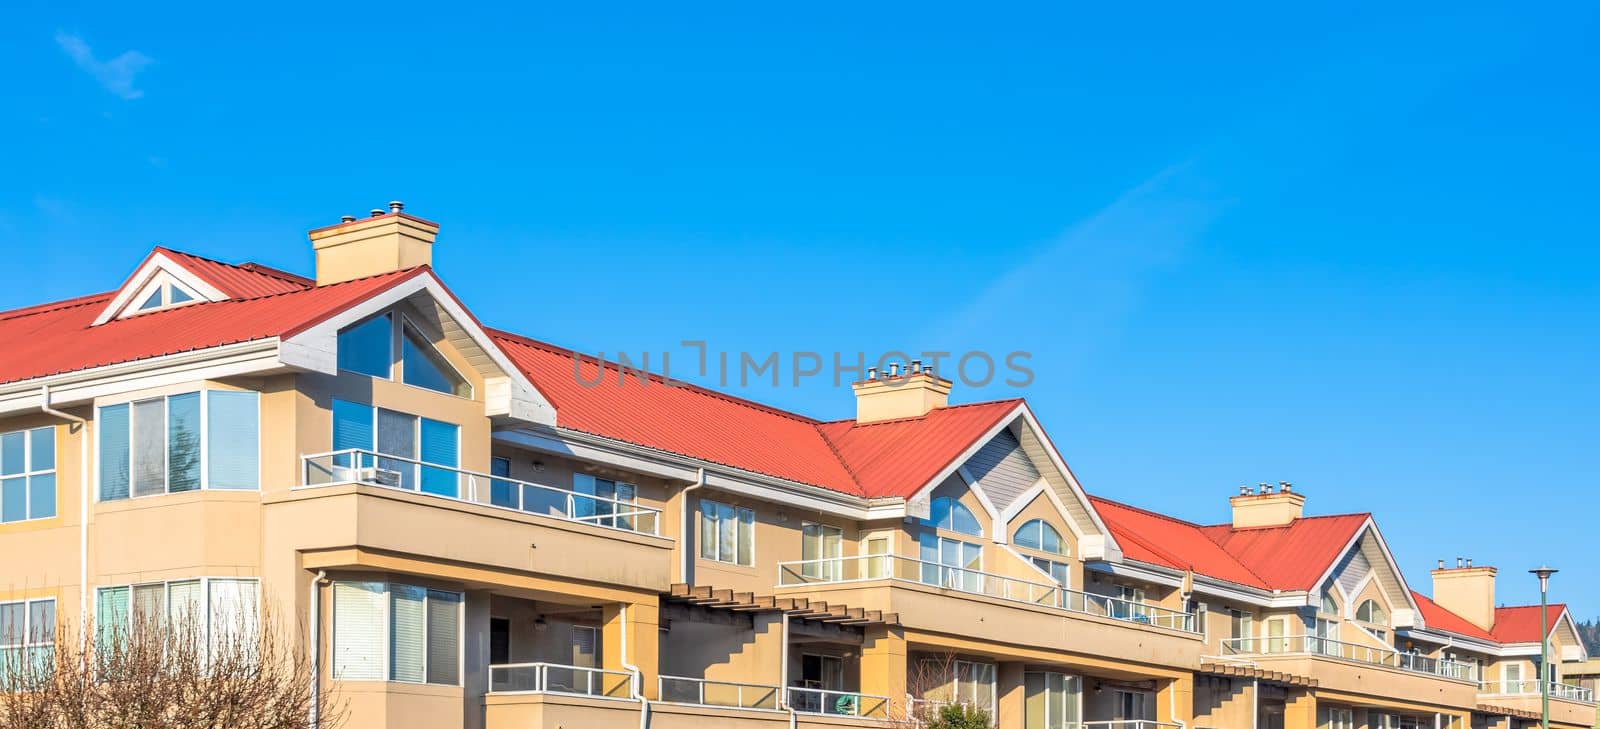 Residential building with red roofs on blue sky background. by Imagenet